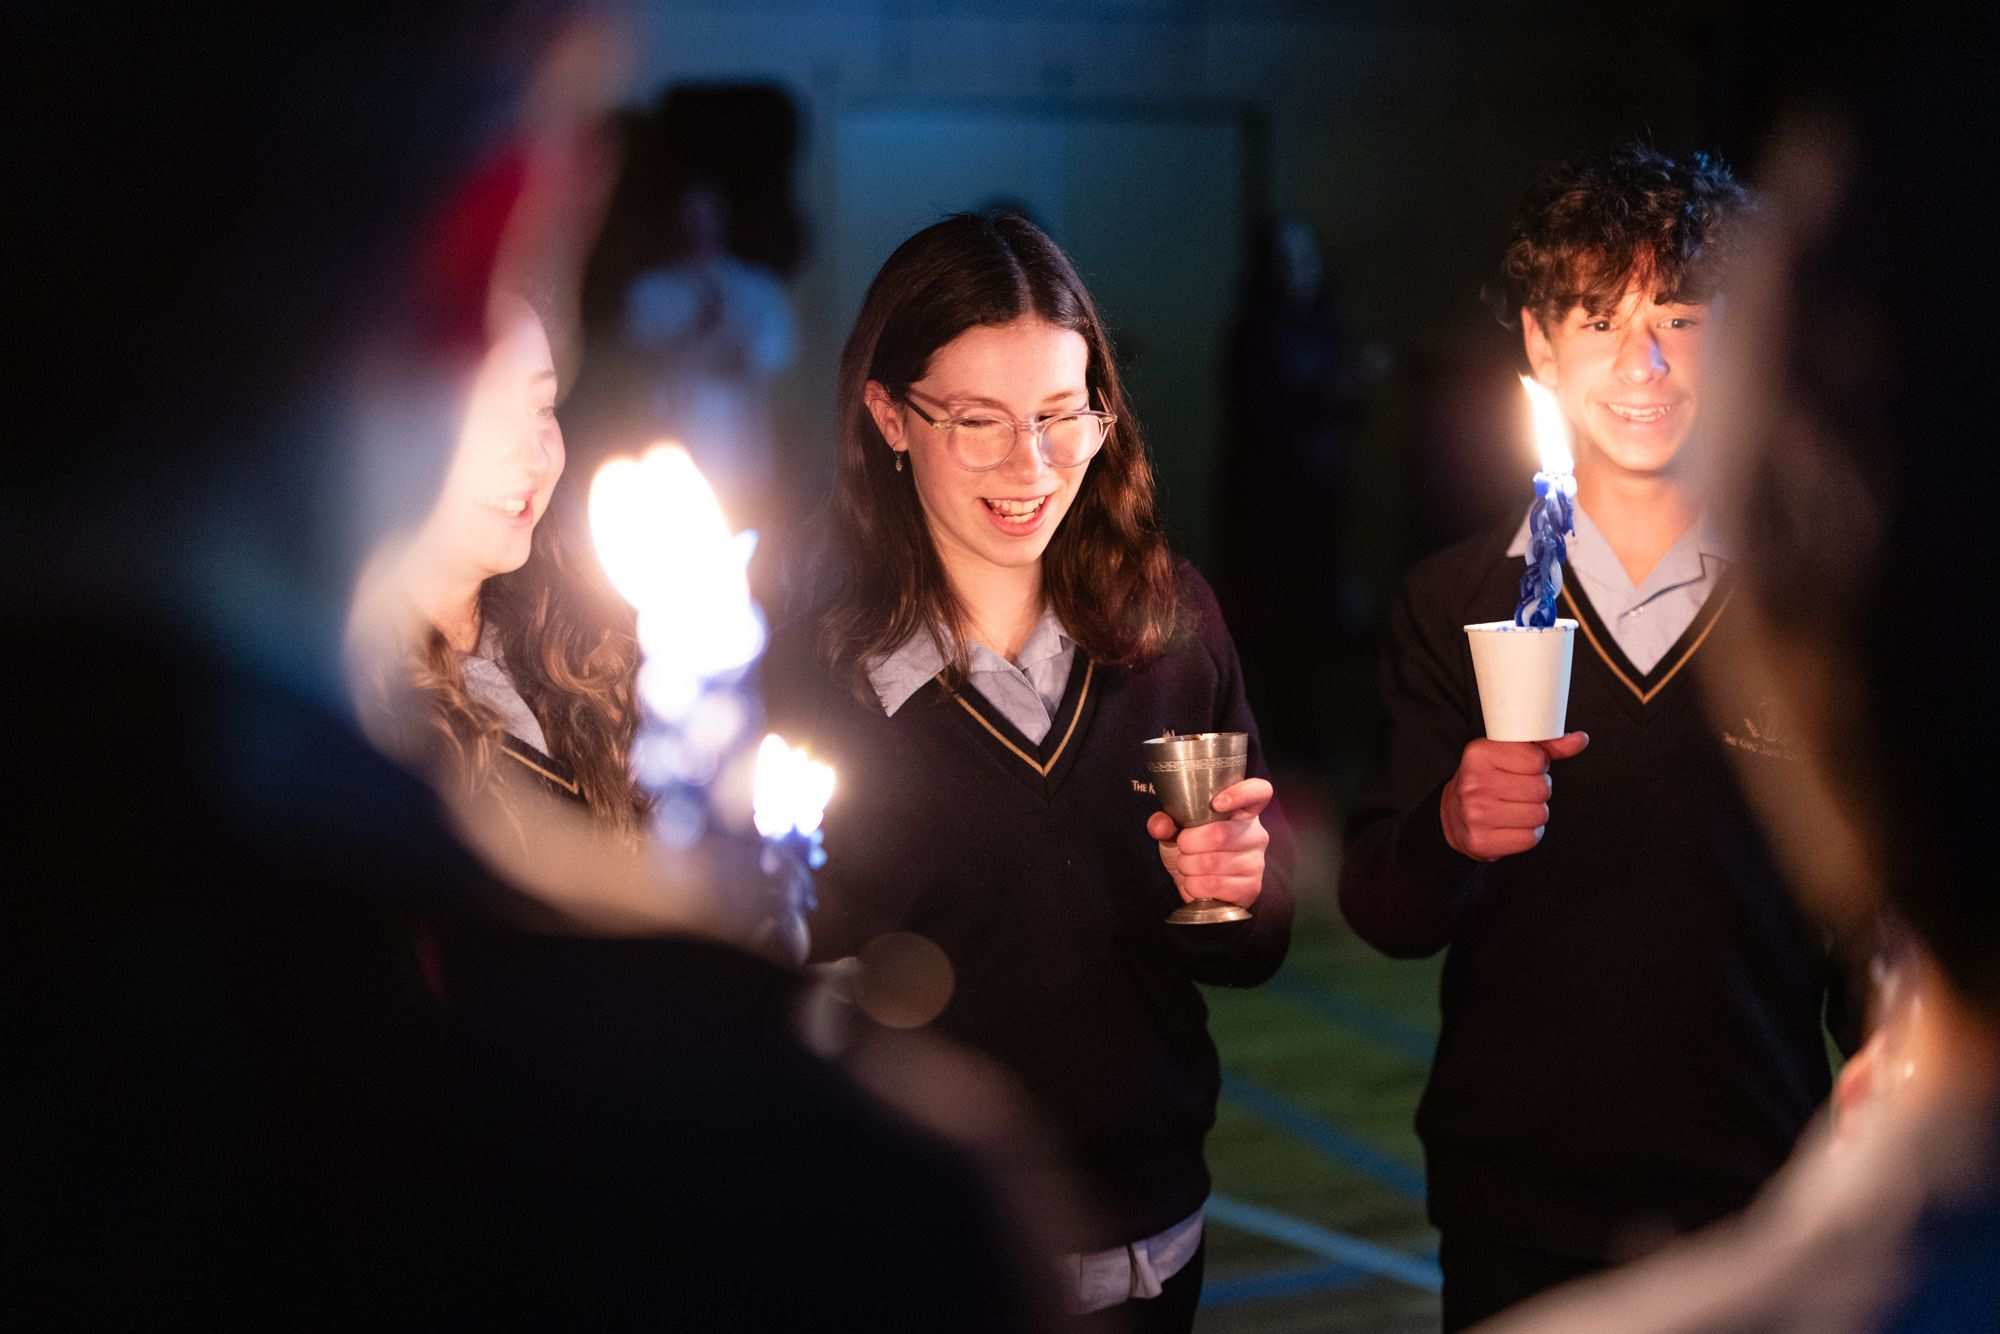 Five Year 7 students are doing Havdalah at the end of Kabbalat Mitzvah. They are holding blue and white braided havdallah candles. Their faces are lit by candlelight